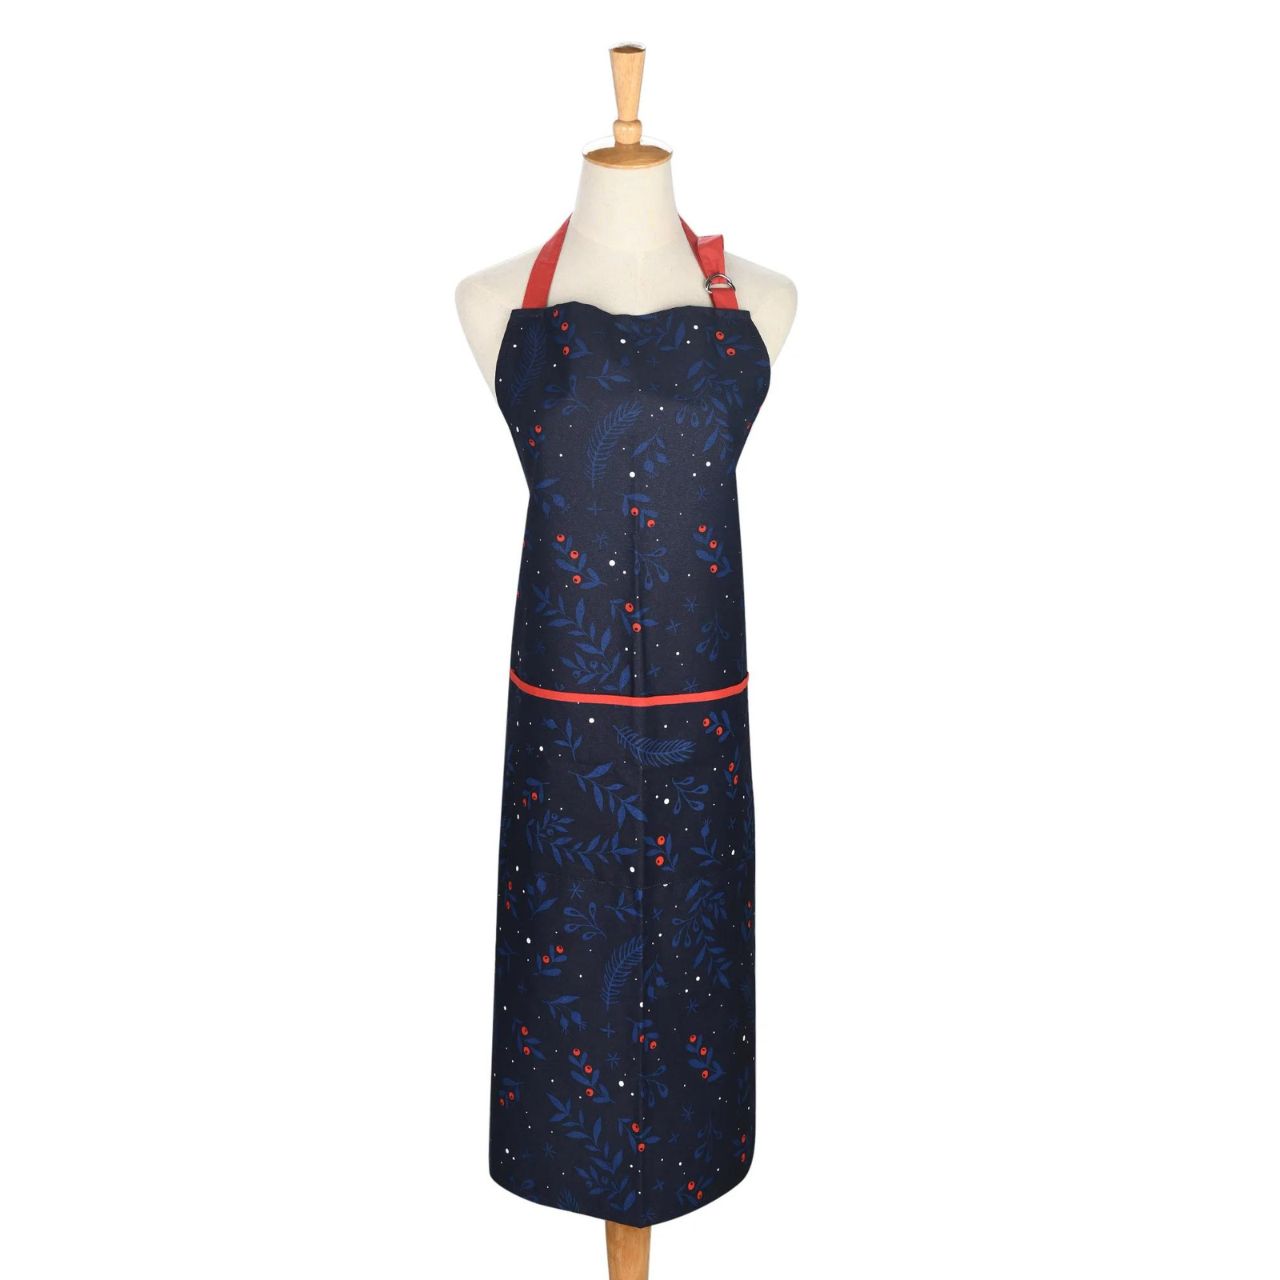 Christmas Festive Night Apron by Mindy Brownes Interiors  A stunning apron in deep blue finished with a Christmas floral design, with pops of red.  A stylish, yet practical way to avoid any outfit mishaps while baking and cooking this Christmas season.